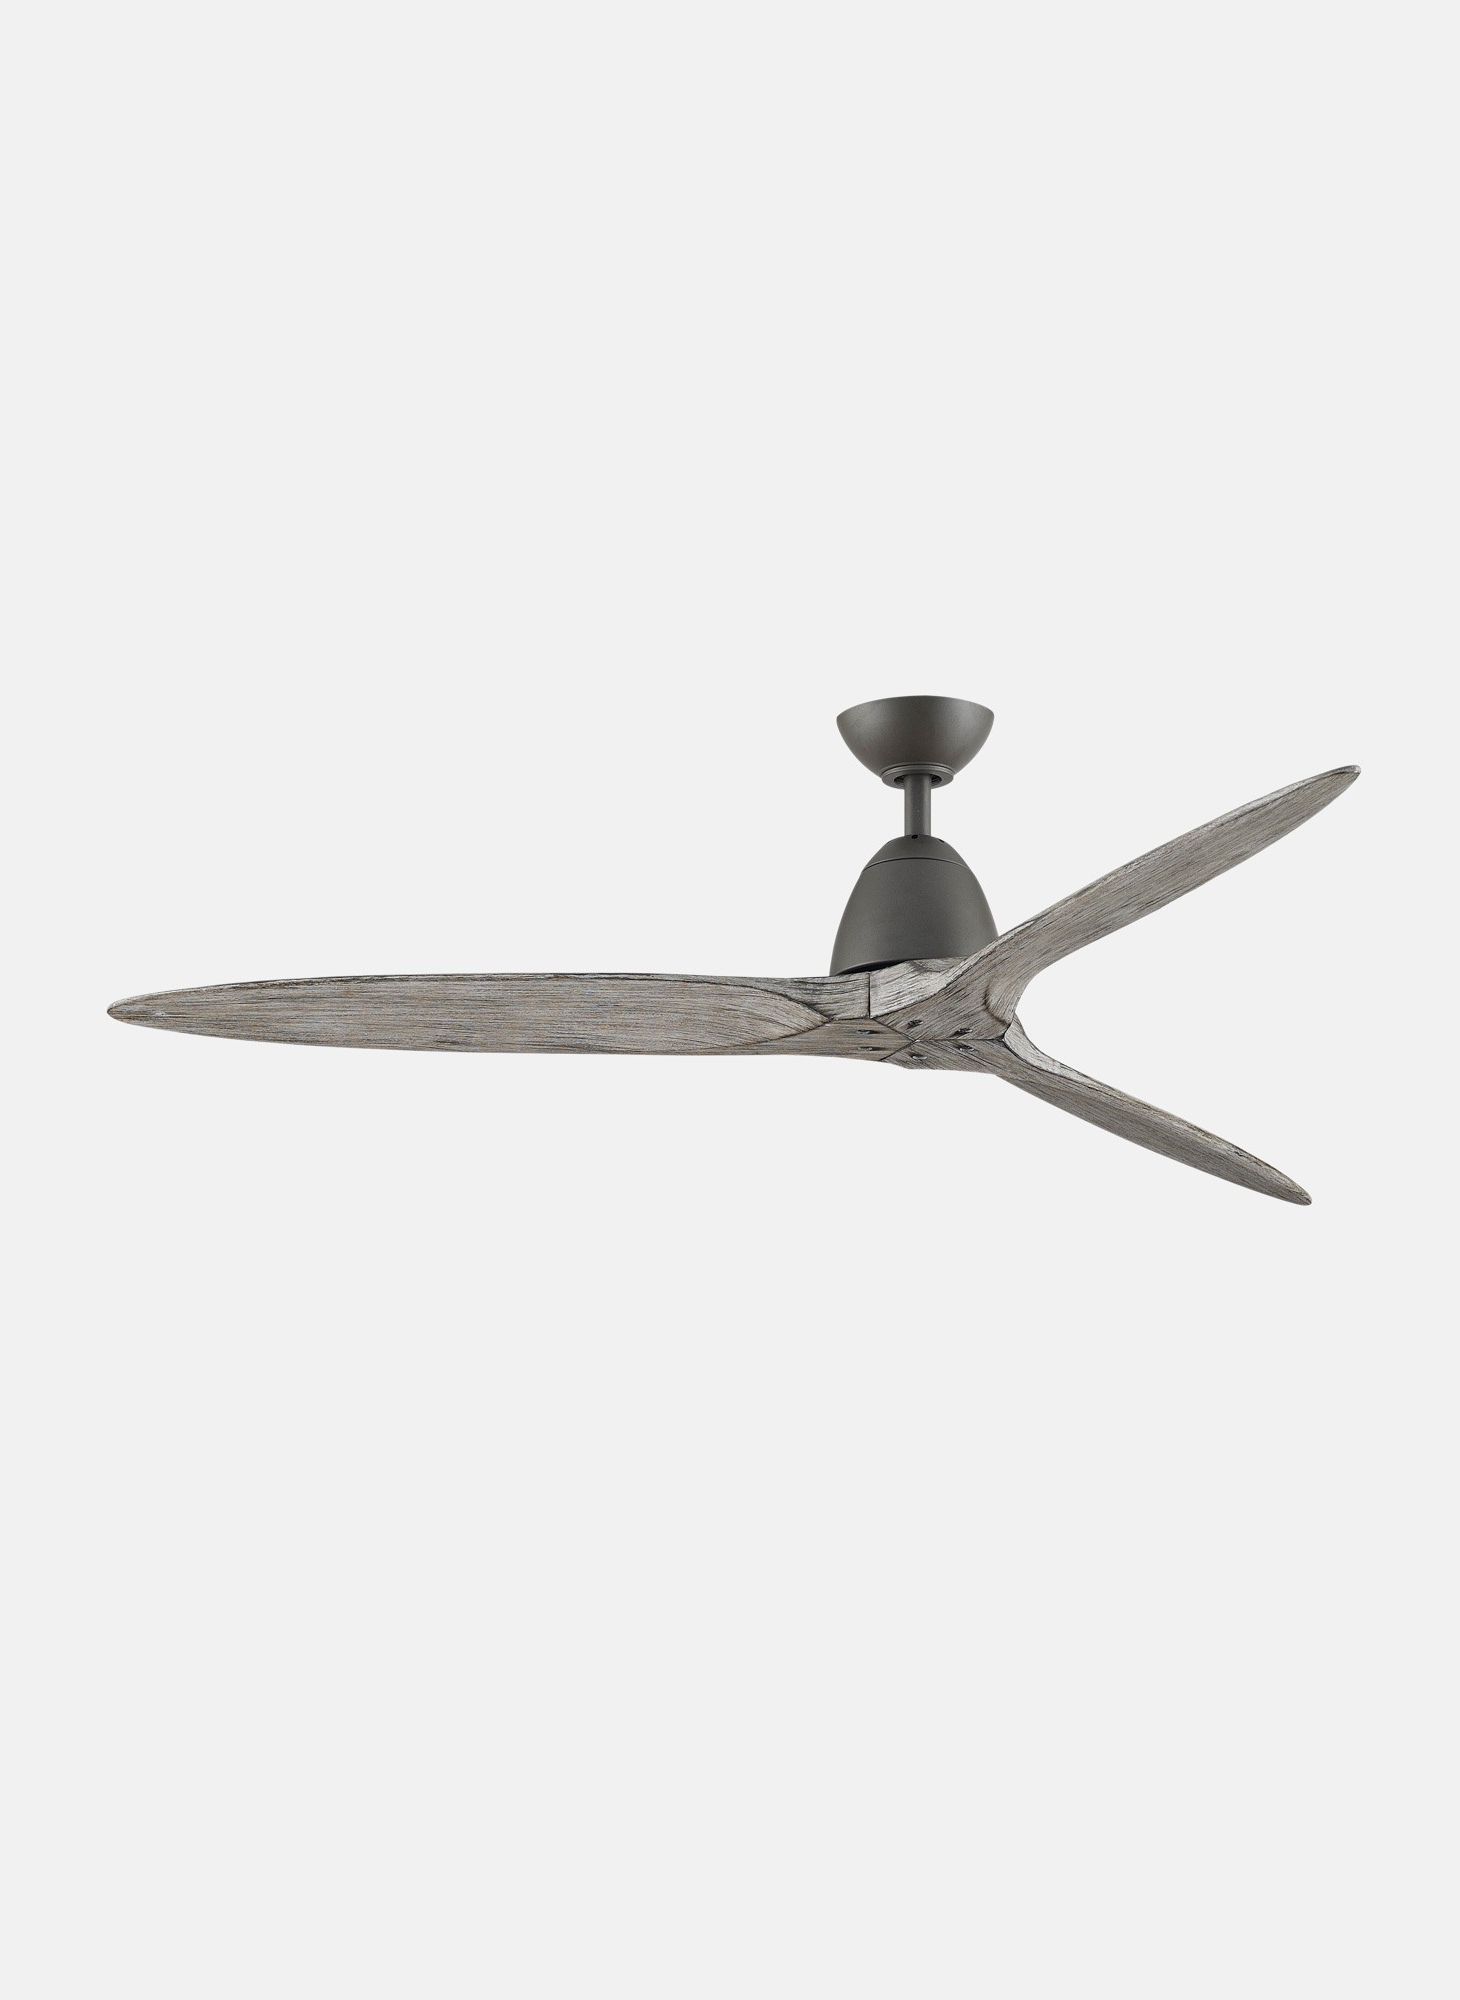 2019 Prop – Fans Intended For Embrace 3 Blade Ceiling Fans (View 16 of 20)